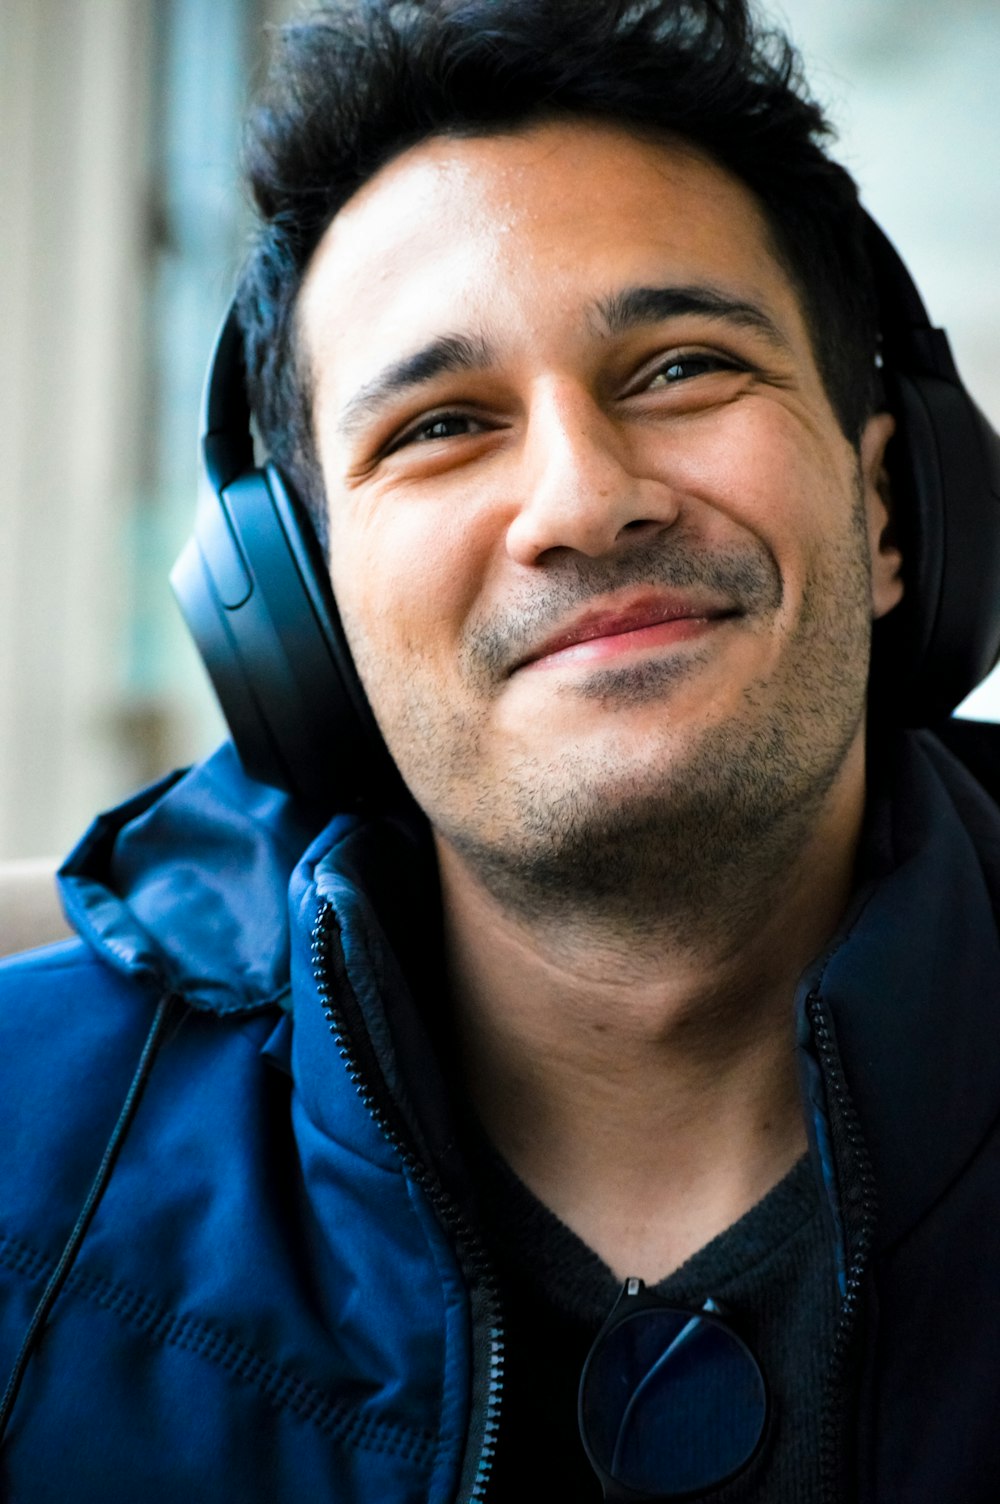 a man with headphones on smiling for the camera